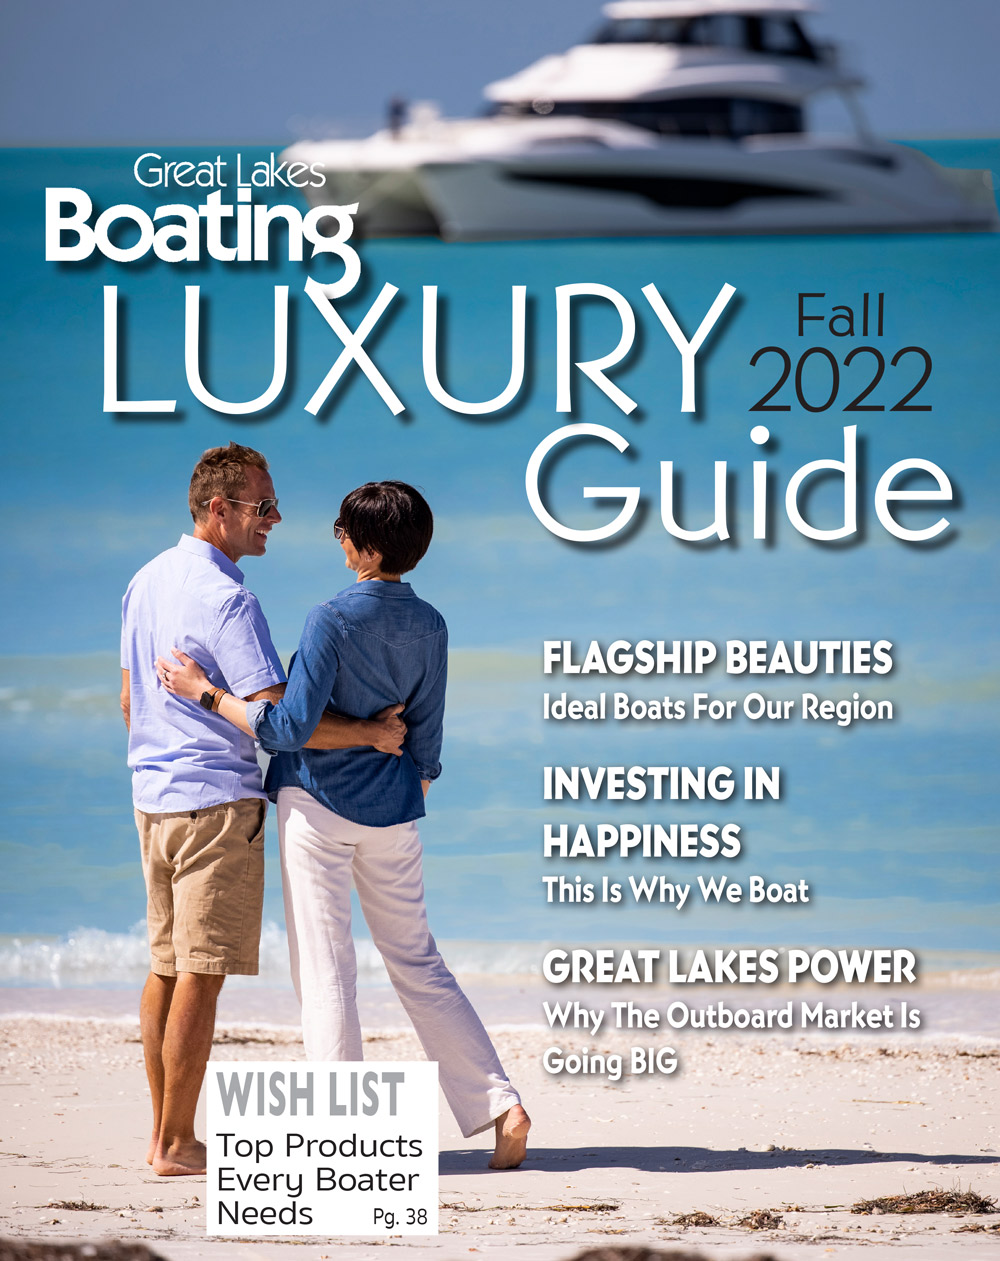 Great Lakes Boating Fall 2022 Luxury Guide cover